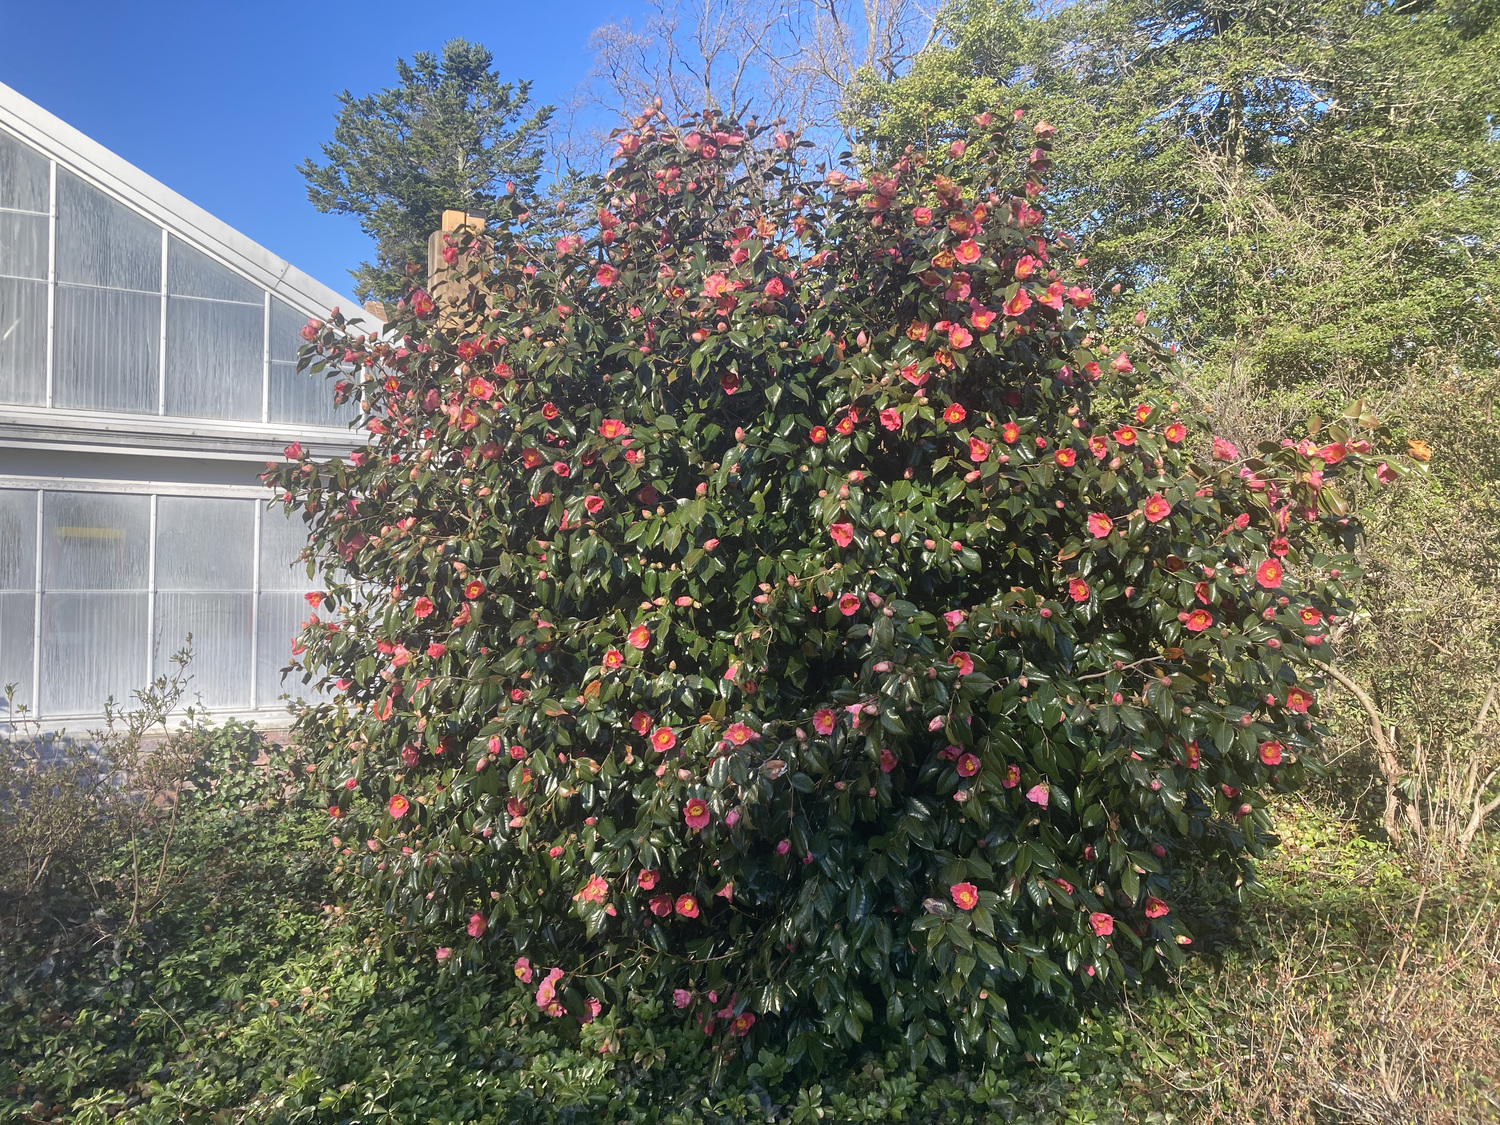 This Camellia japonica seen in full bloom outside the Camellia House at Planting Fields. VINCENT SIMEONE